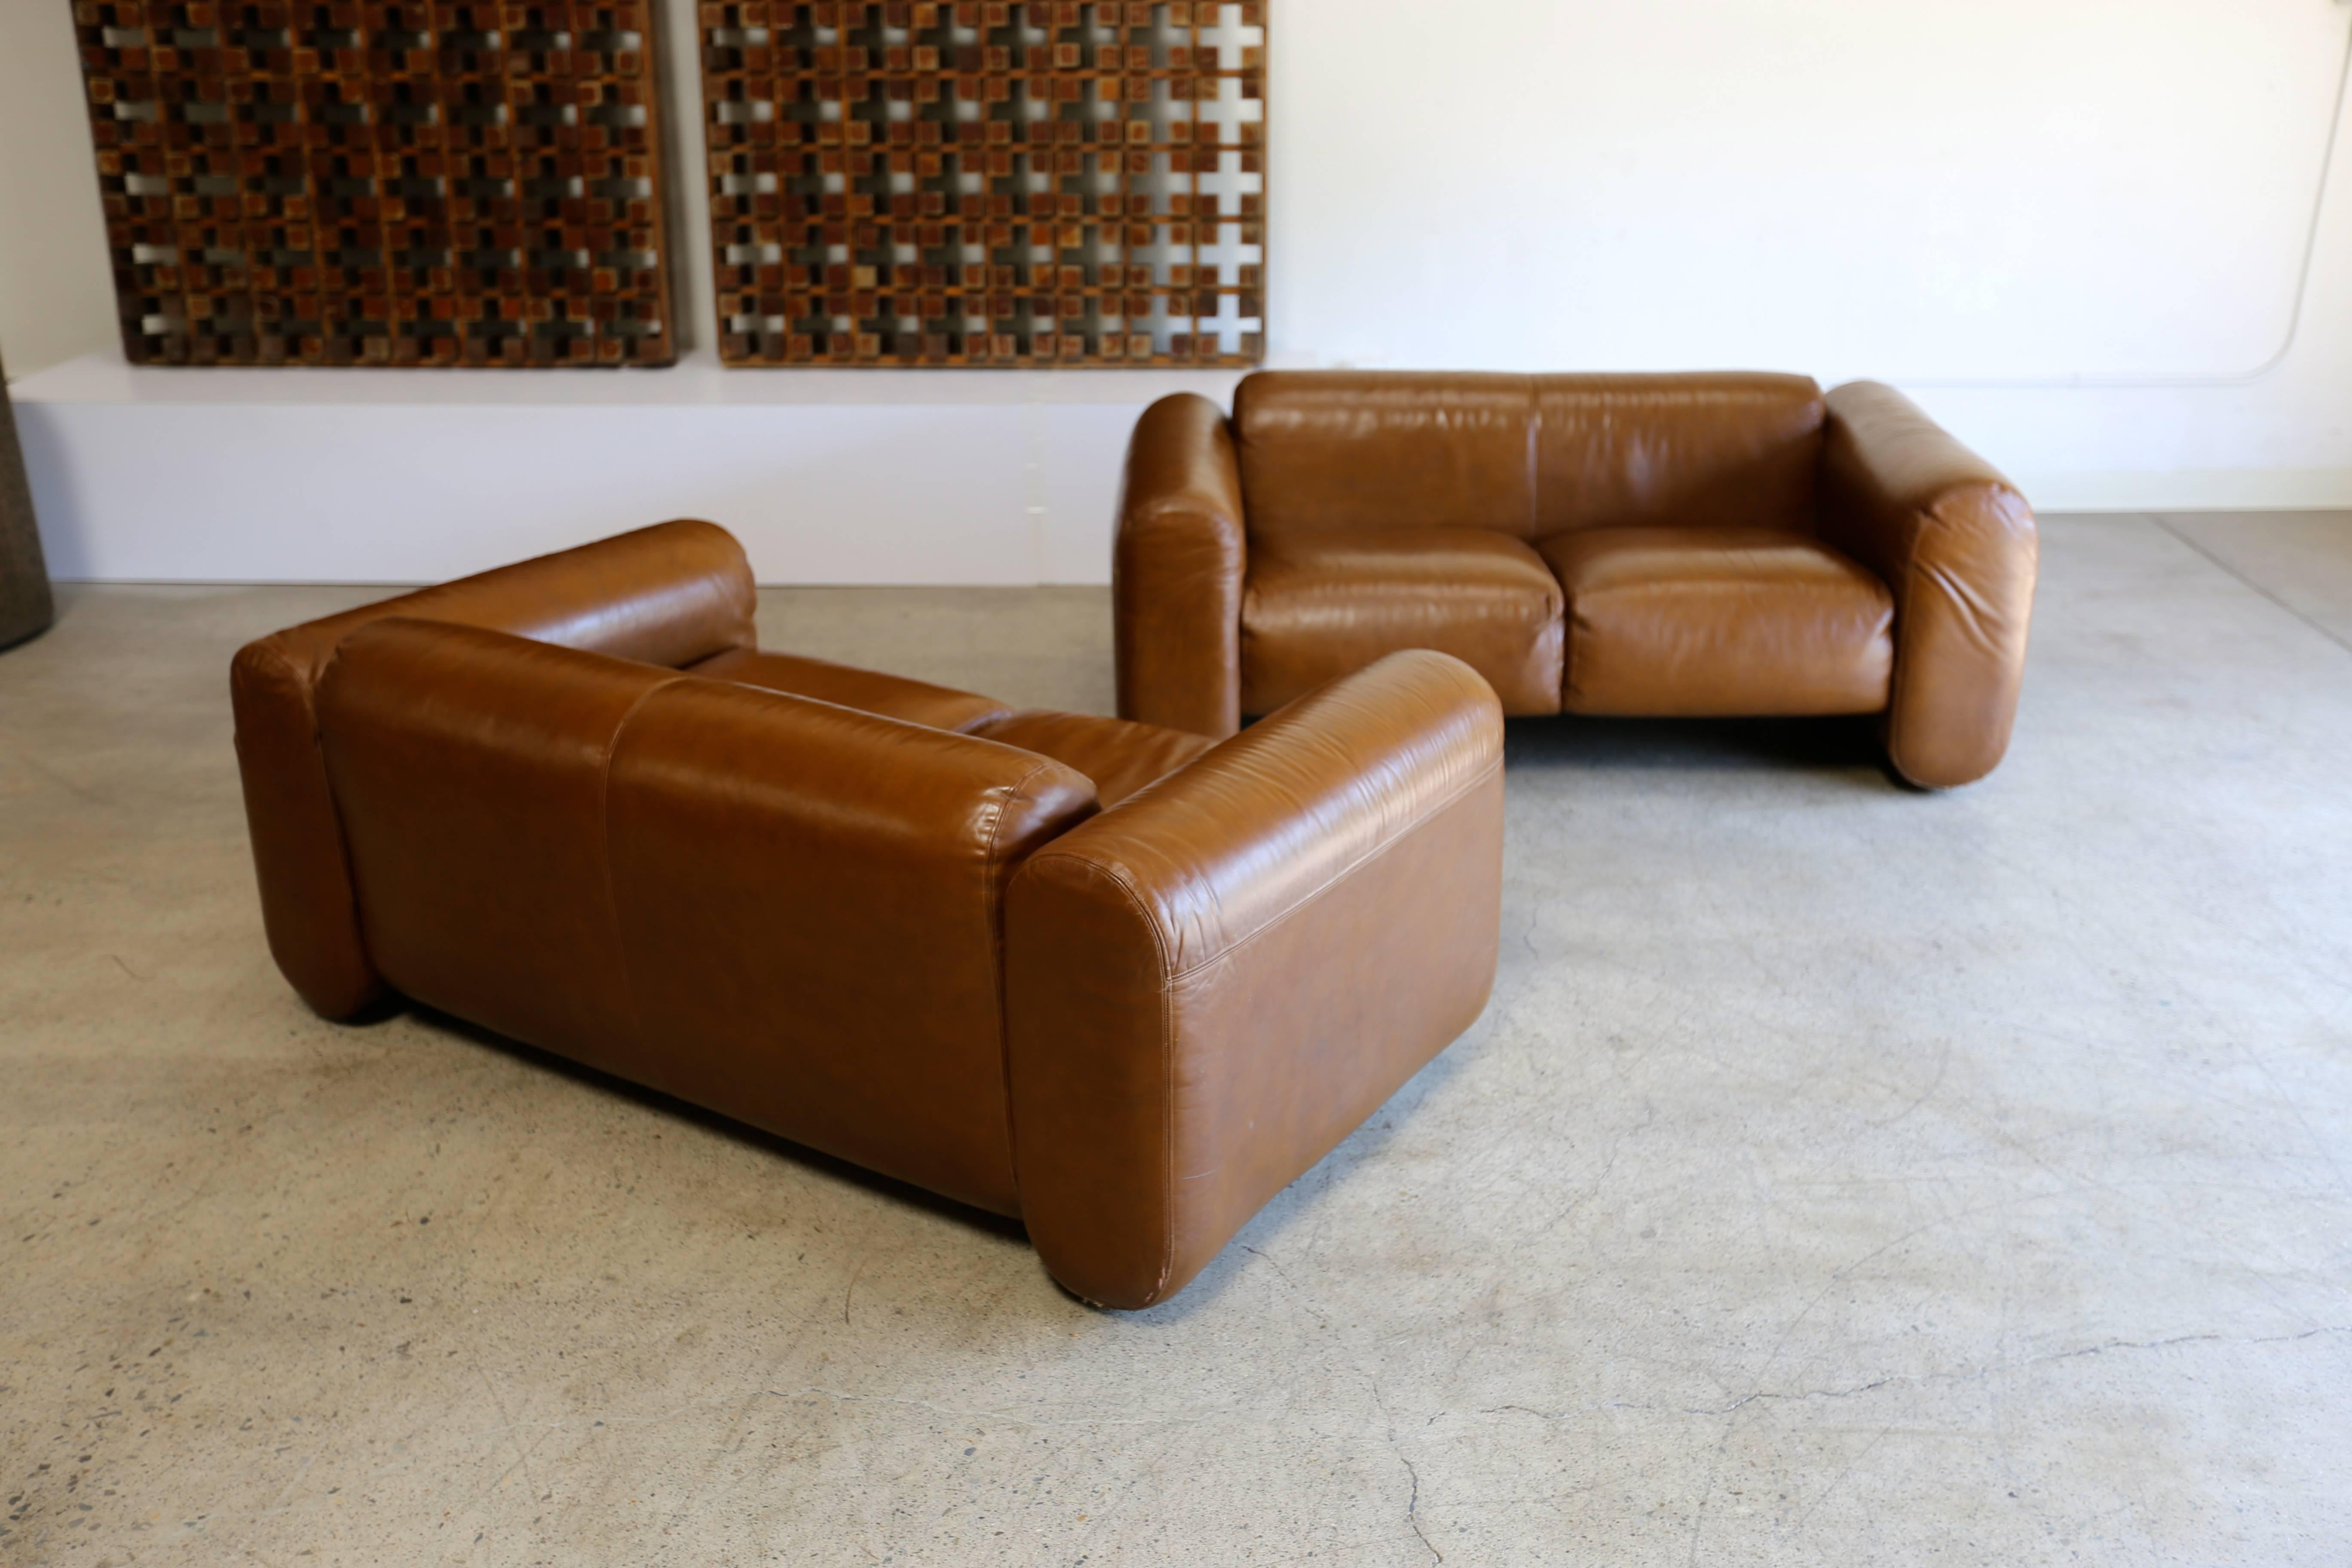 Pair of leather sofas by Stendig.